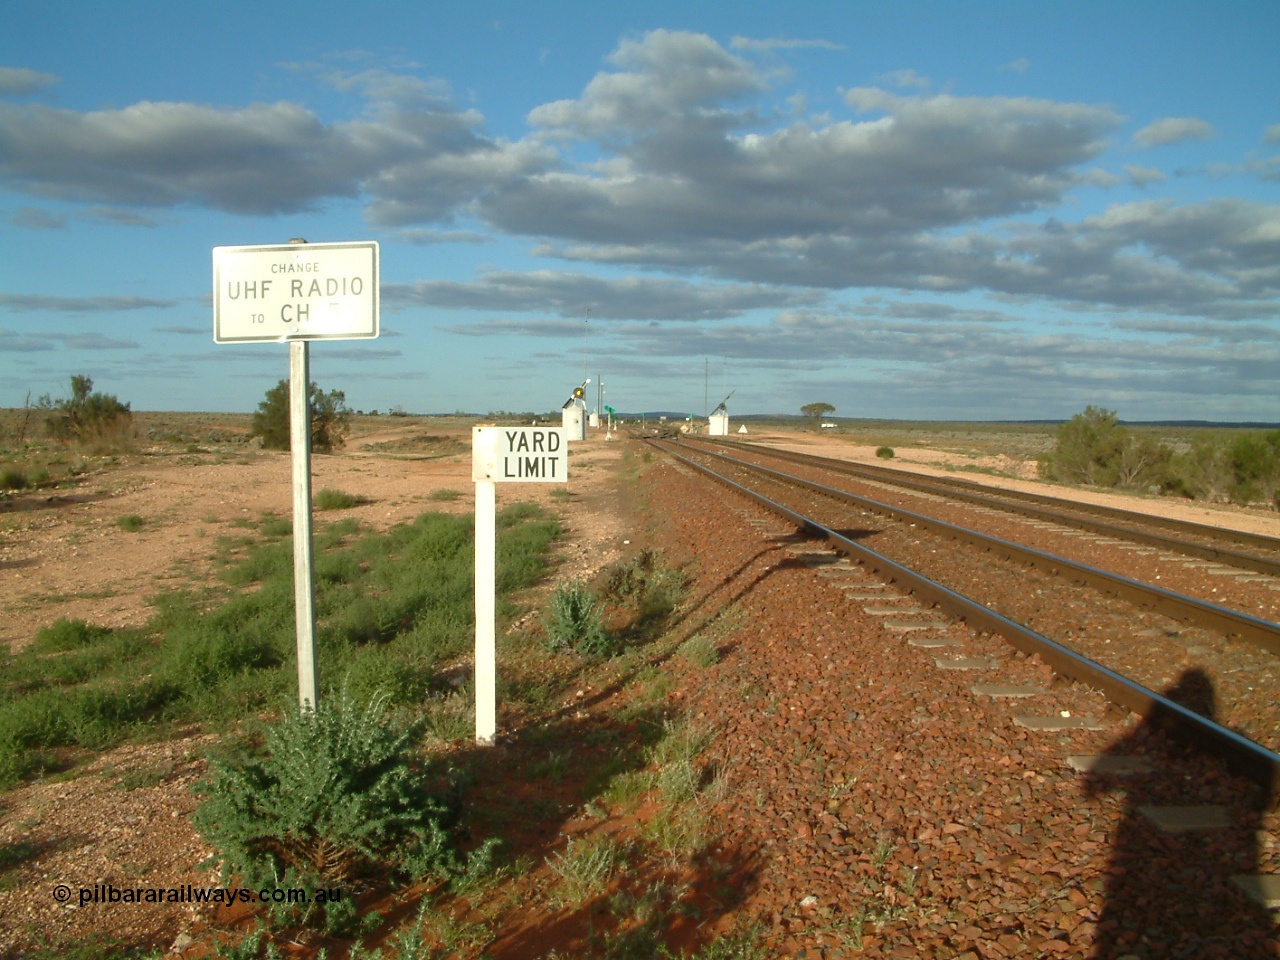 030415 171548
Tarcoola, at the 504.5 km, looking east along the Central Australian line at the western yard limit and radio channel change boards, Trans Australian line is on the right. Tarcoola is the junction for the TAR and CAR railways. [url=https://goo.gl/maps/vUPjQ7MxV2e9ndSY7]GeoData location[/url]. 15th April 2003.
